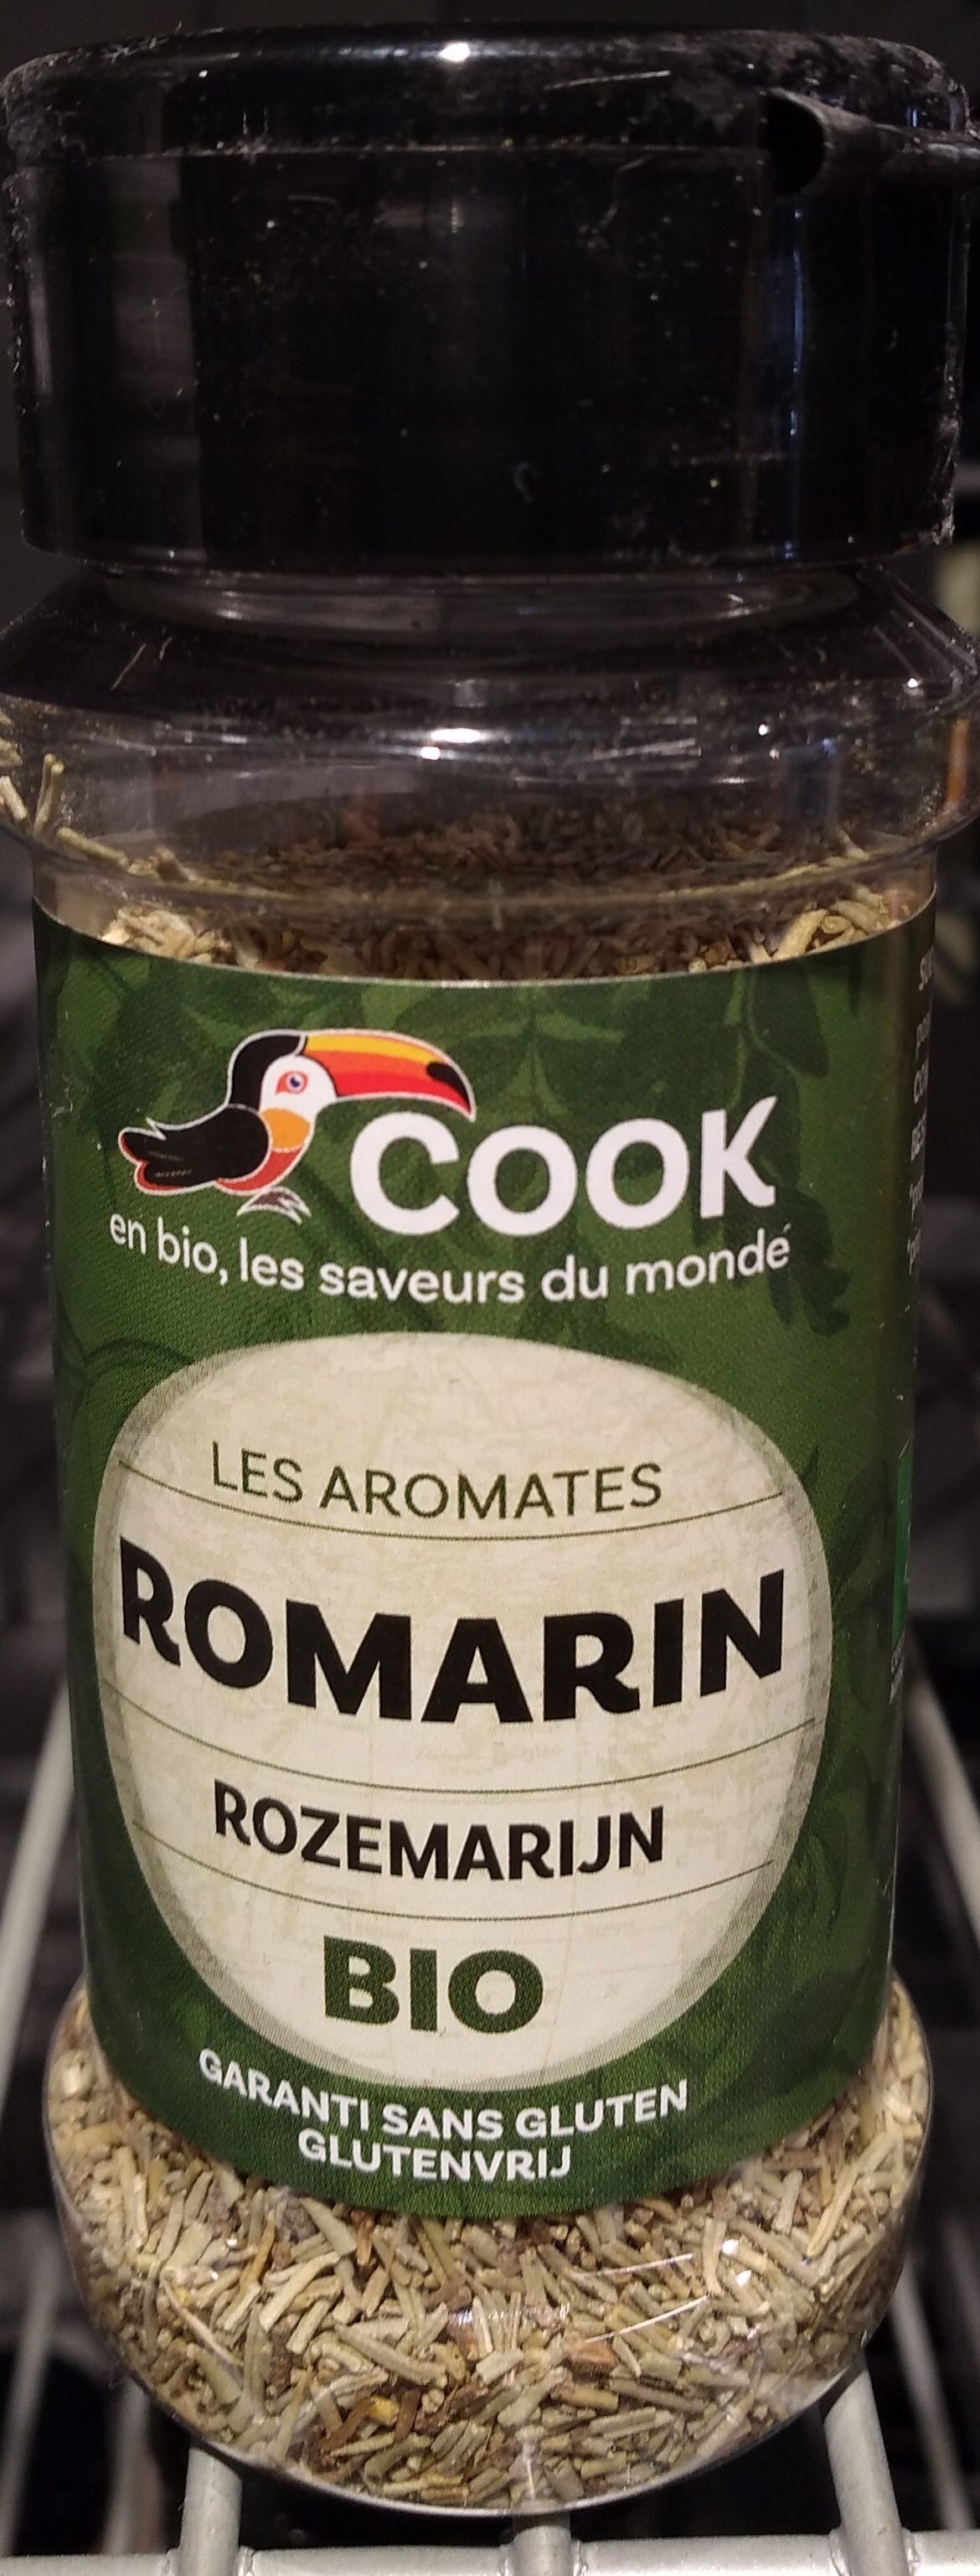 ROMARIN feuilles "COOK" 25g* - Product